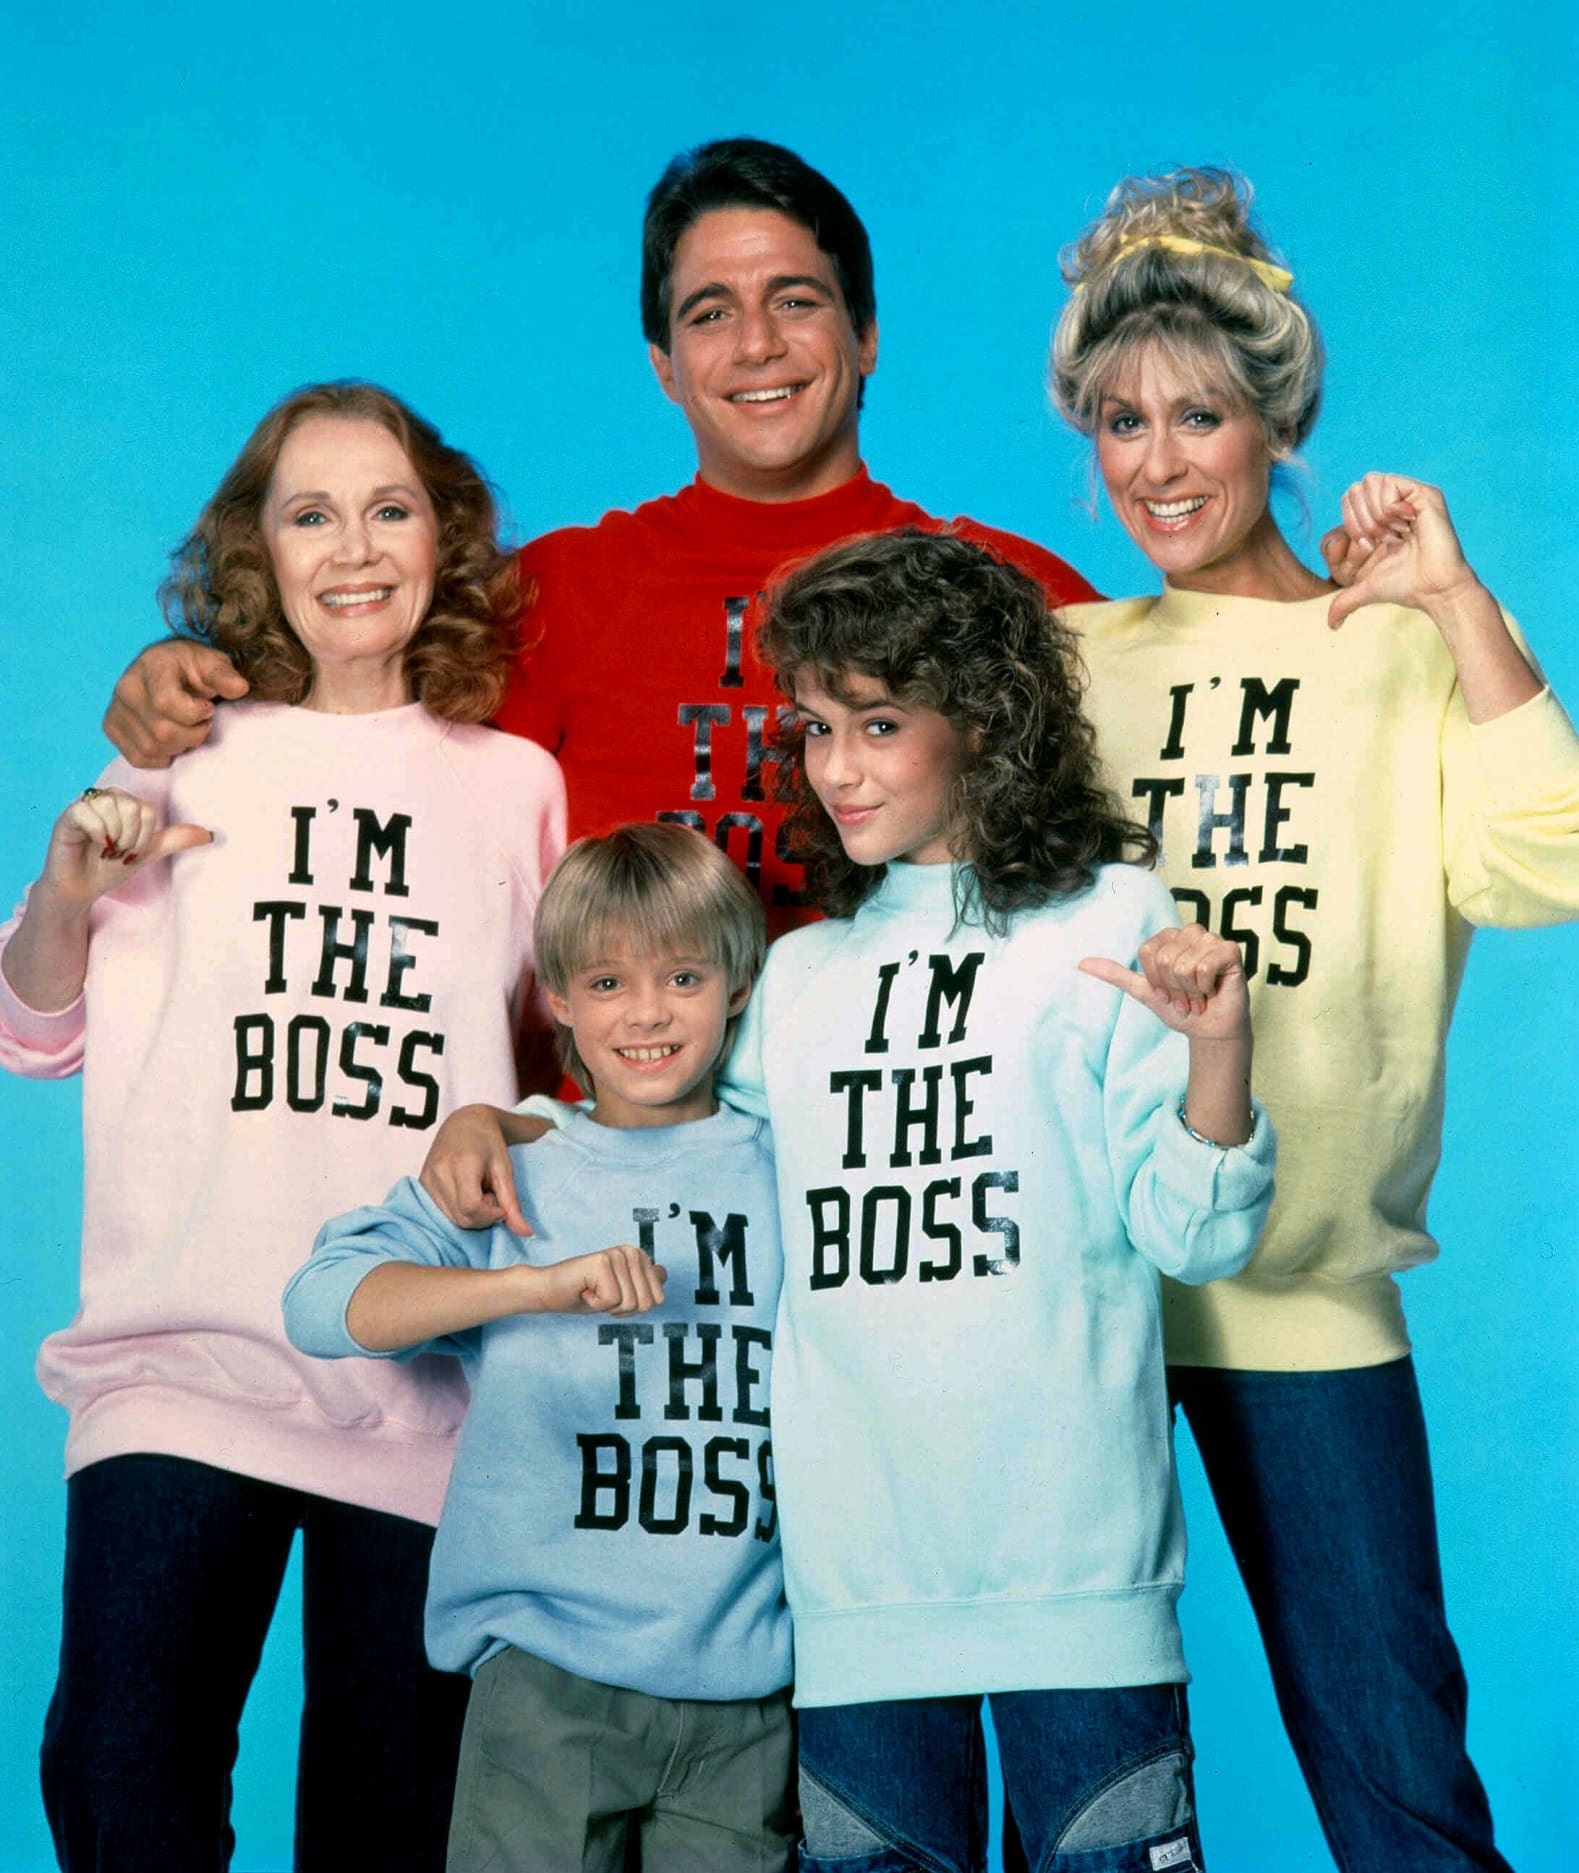 https://popculturereferences.com/wp-content/uploads/2022/12/whos-the-boss-cast.jpg